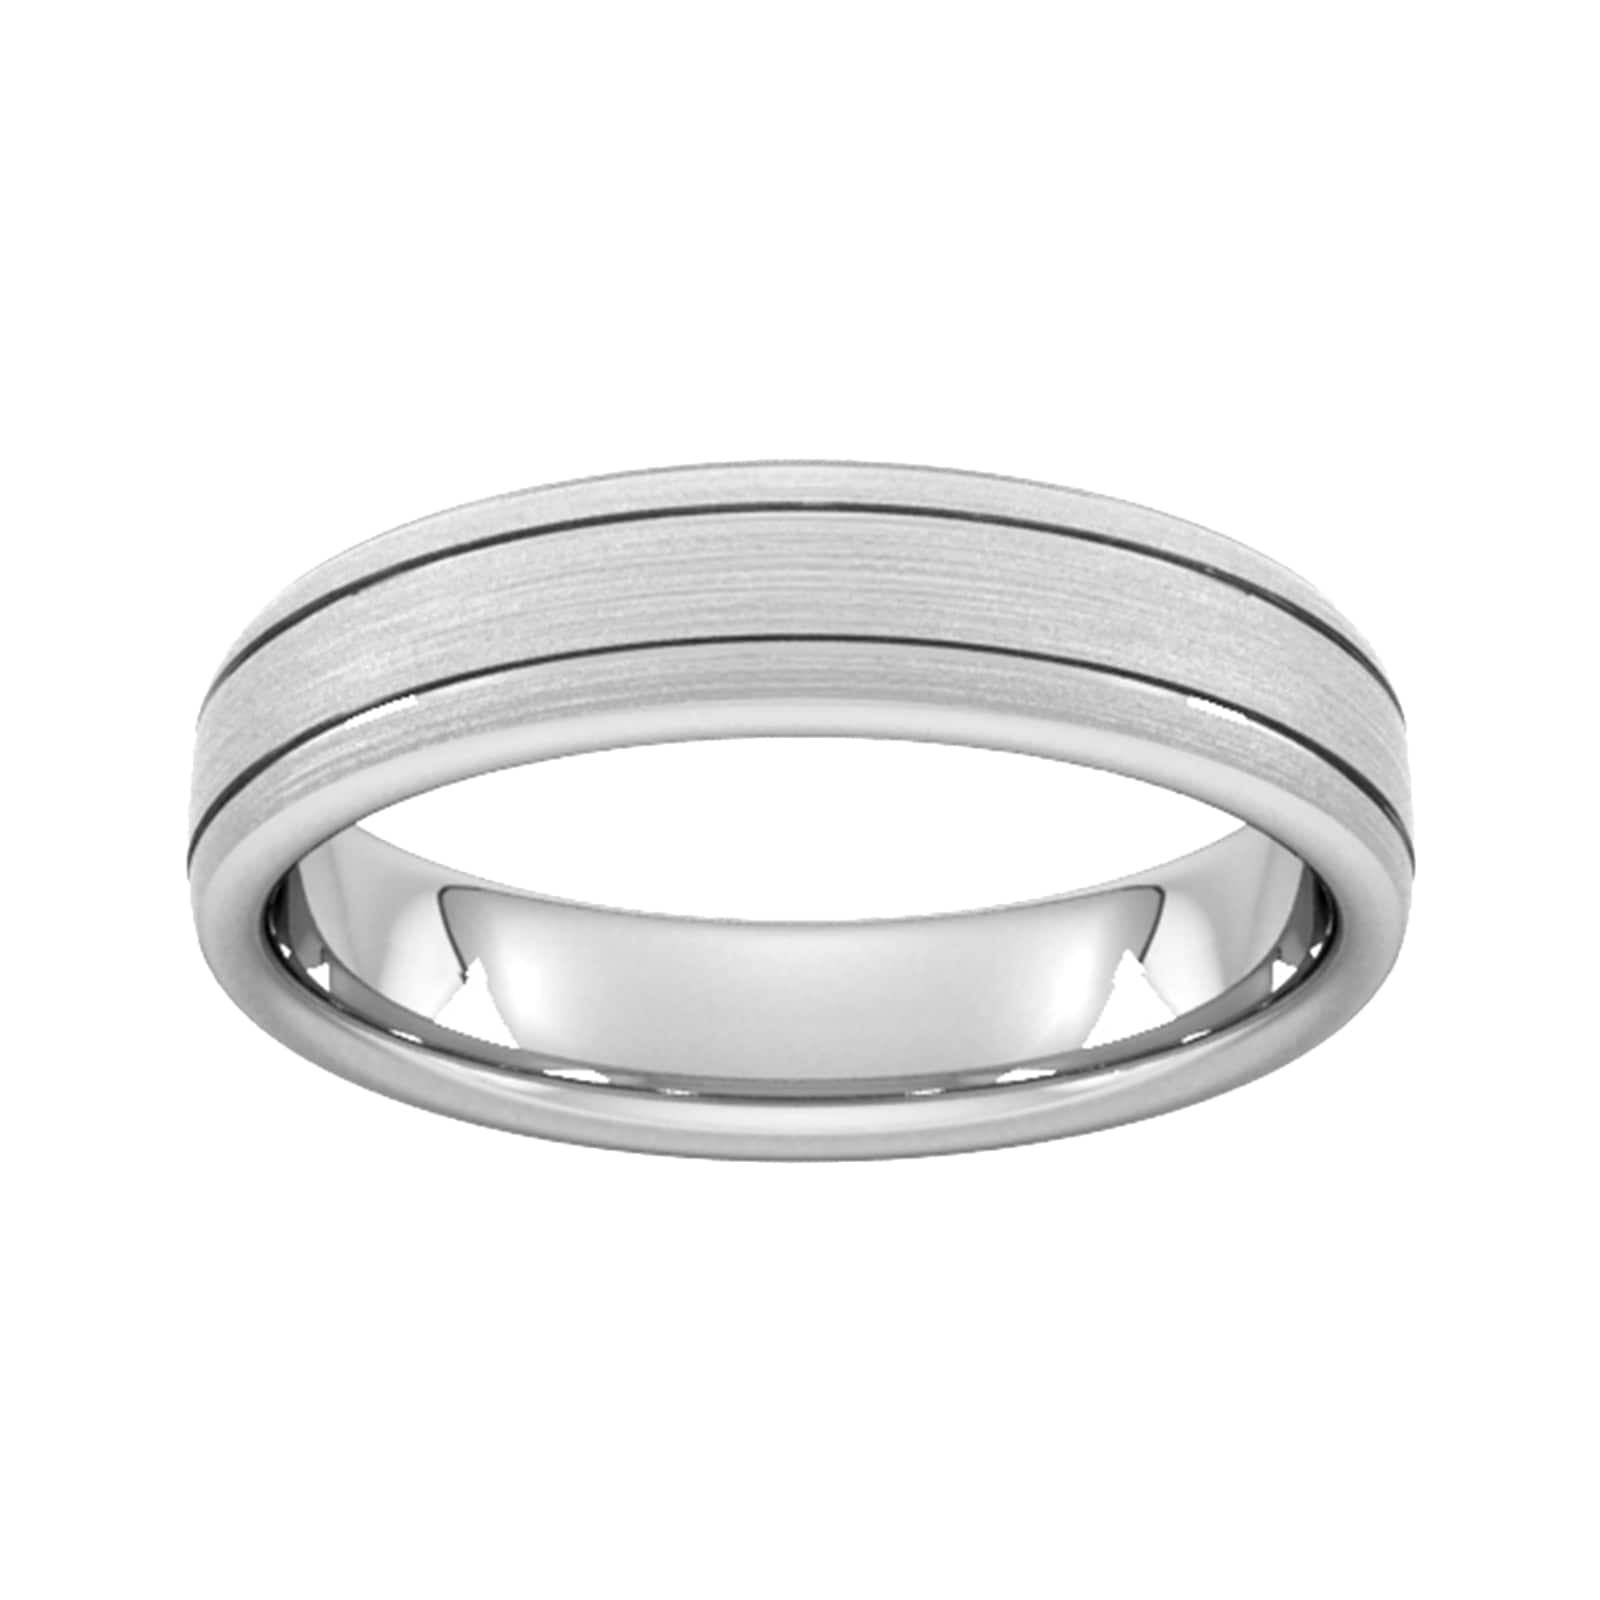 5mm D Shape Standard Matt Finish With Double Grooves Wedding Ring In Platinum - Ring Size T